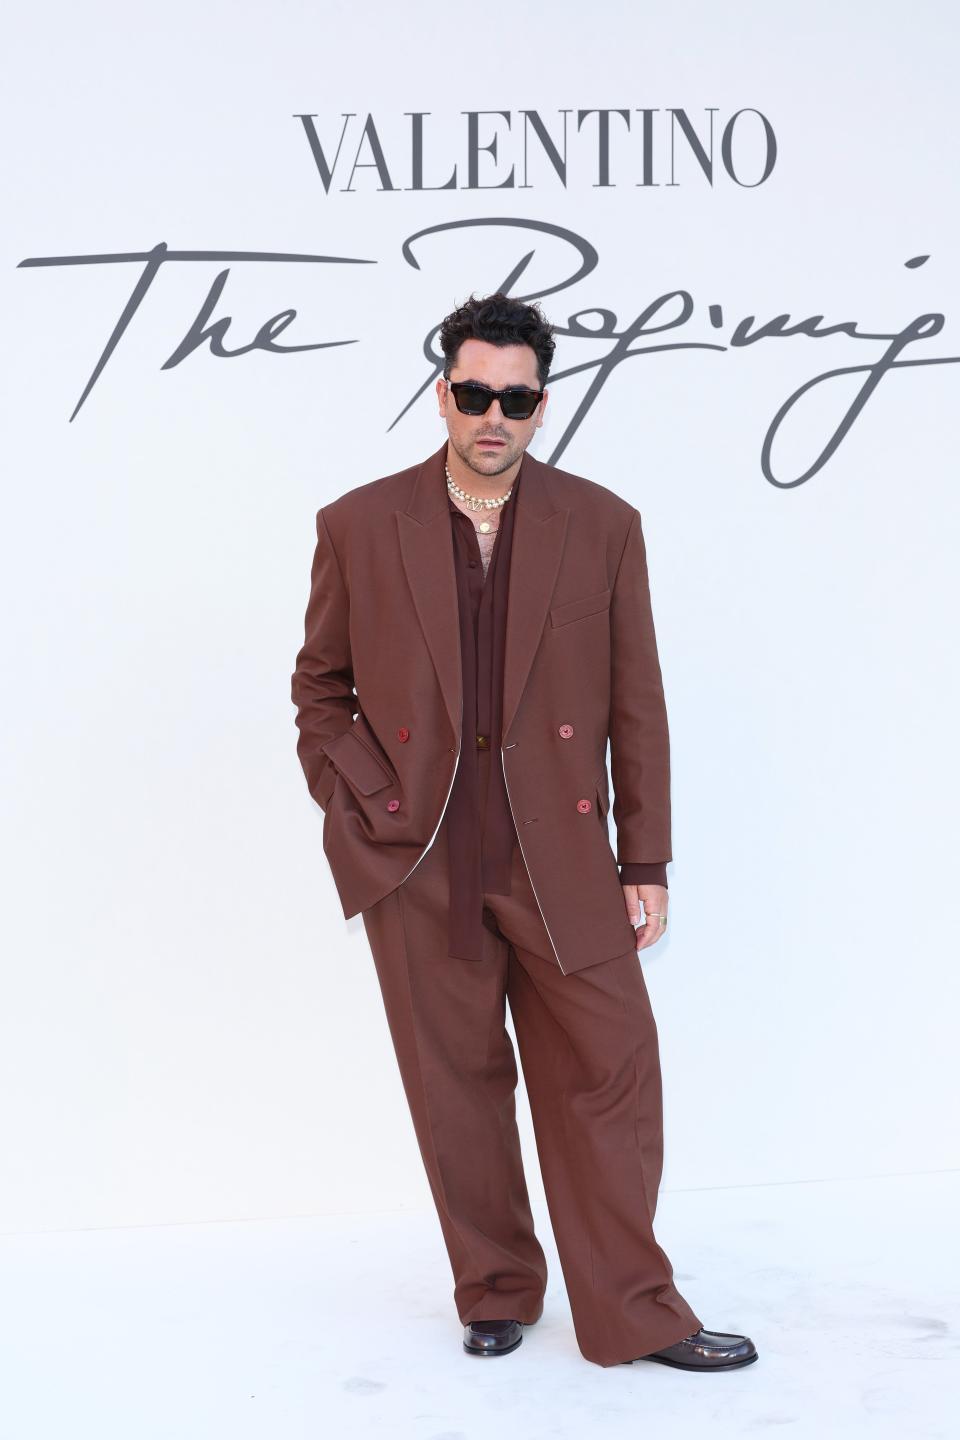 Dan Levy posing at Valentino's Haute Couture show in Rome, Italy.